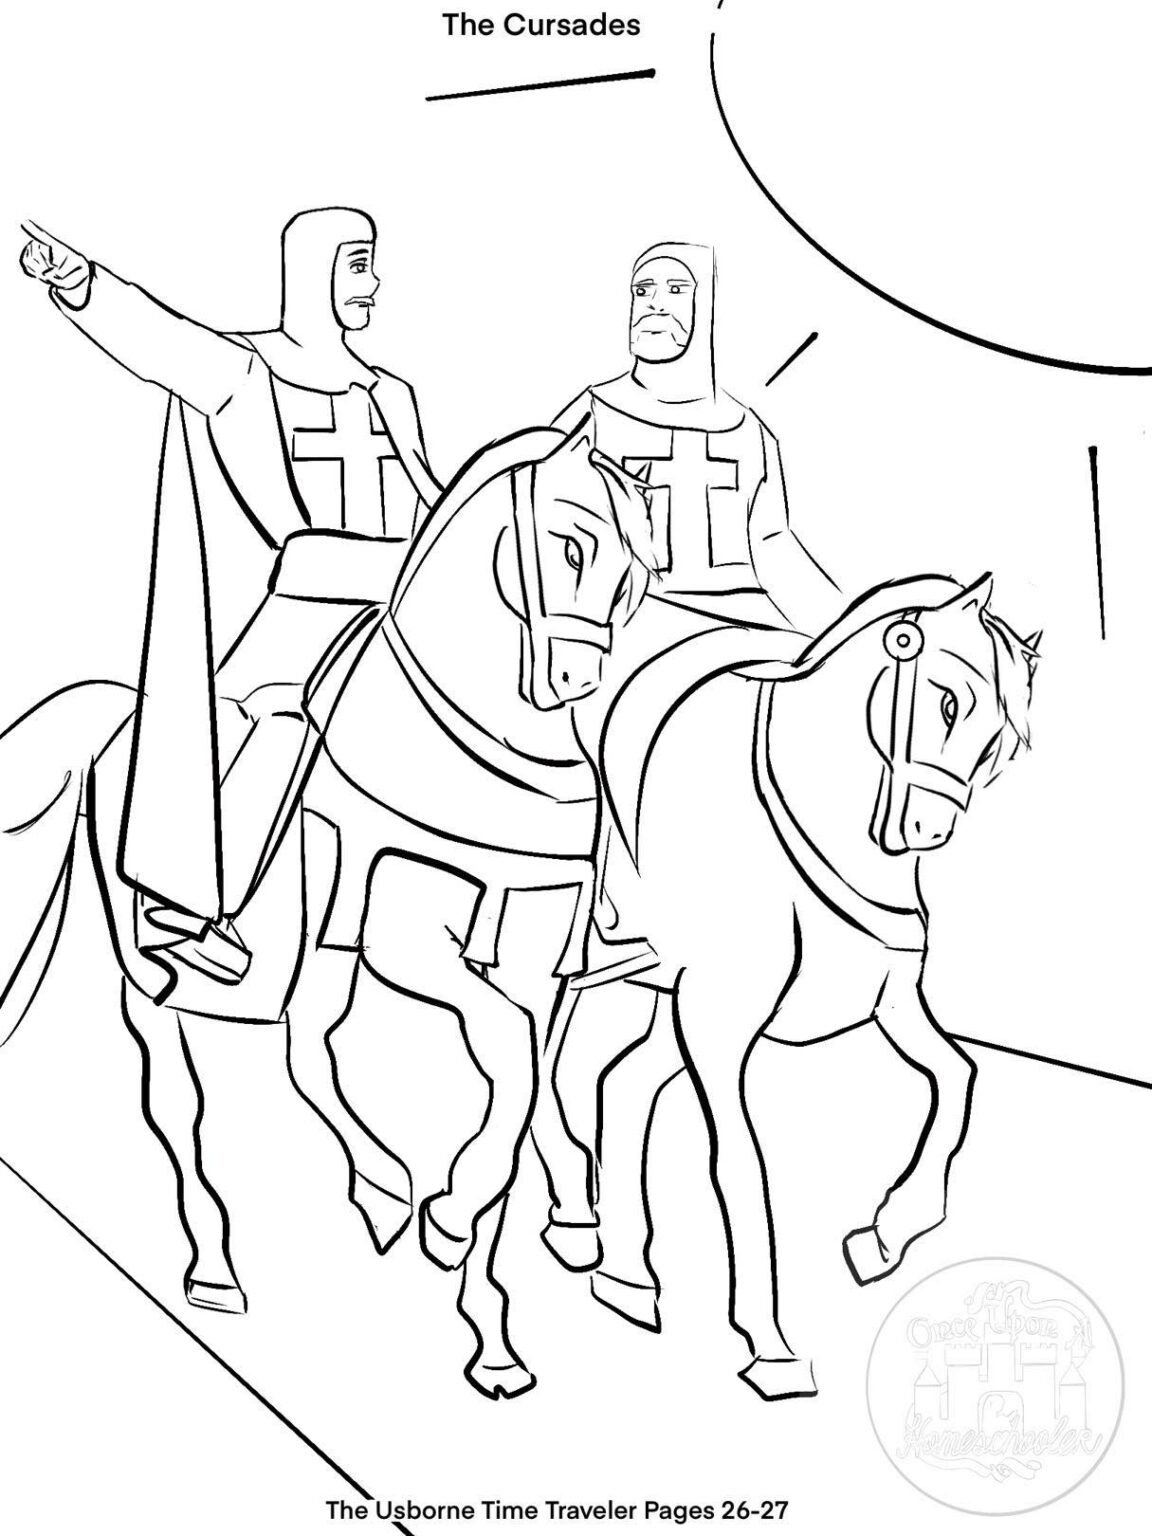 The Usborne Time Traveler Pages 26-27 Coloring Page - Once Upon a ...